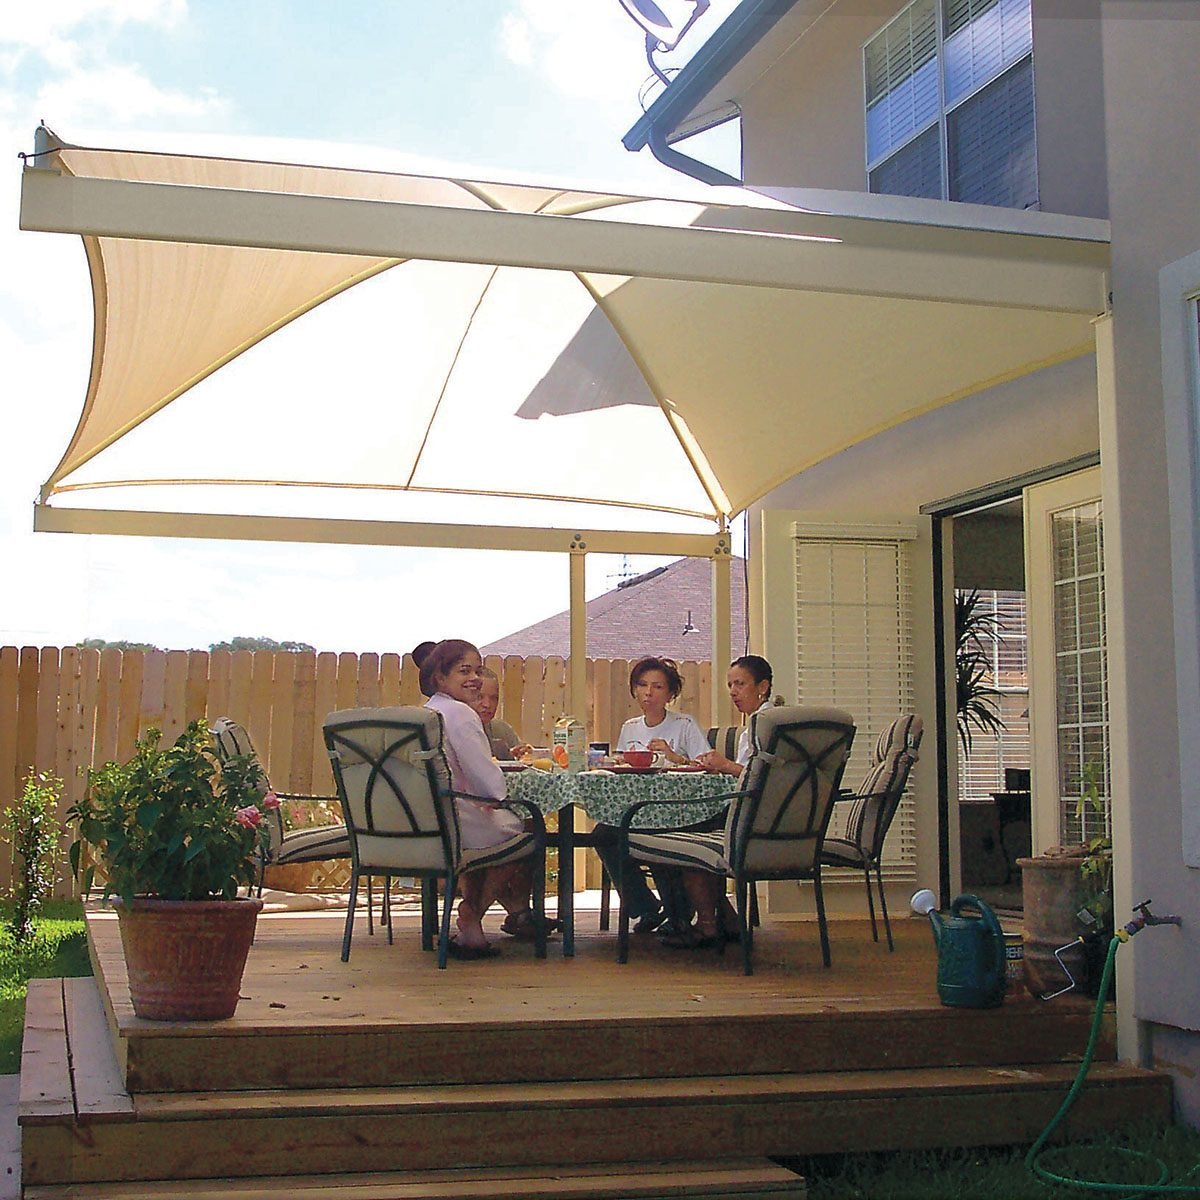 How To Shade Your Deck Or Patio With A Diy Awning Family Handyman